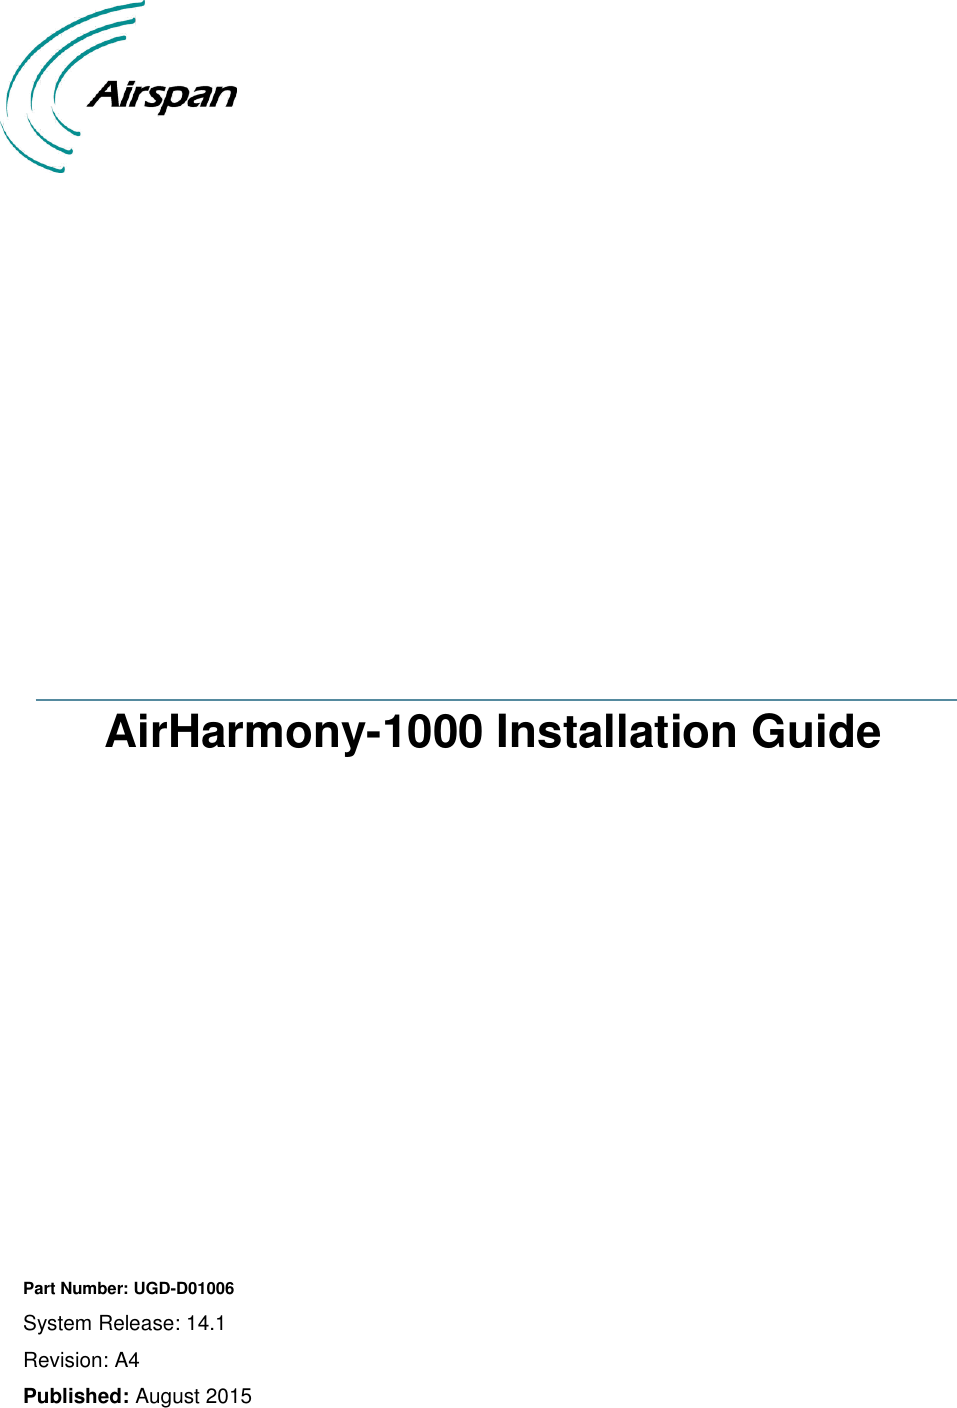                       AirHarmony-1000 Installation Guide                Part Number: UGD-D01006 System Release: 14.1 Revision: A4 Published: August 2015  